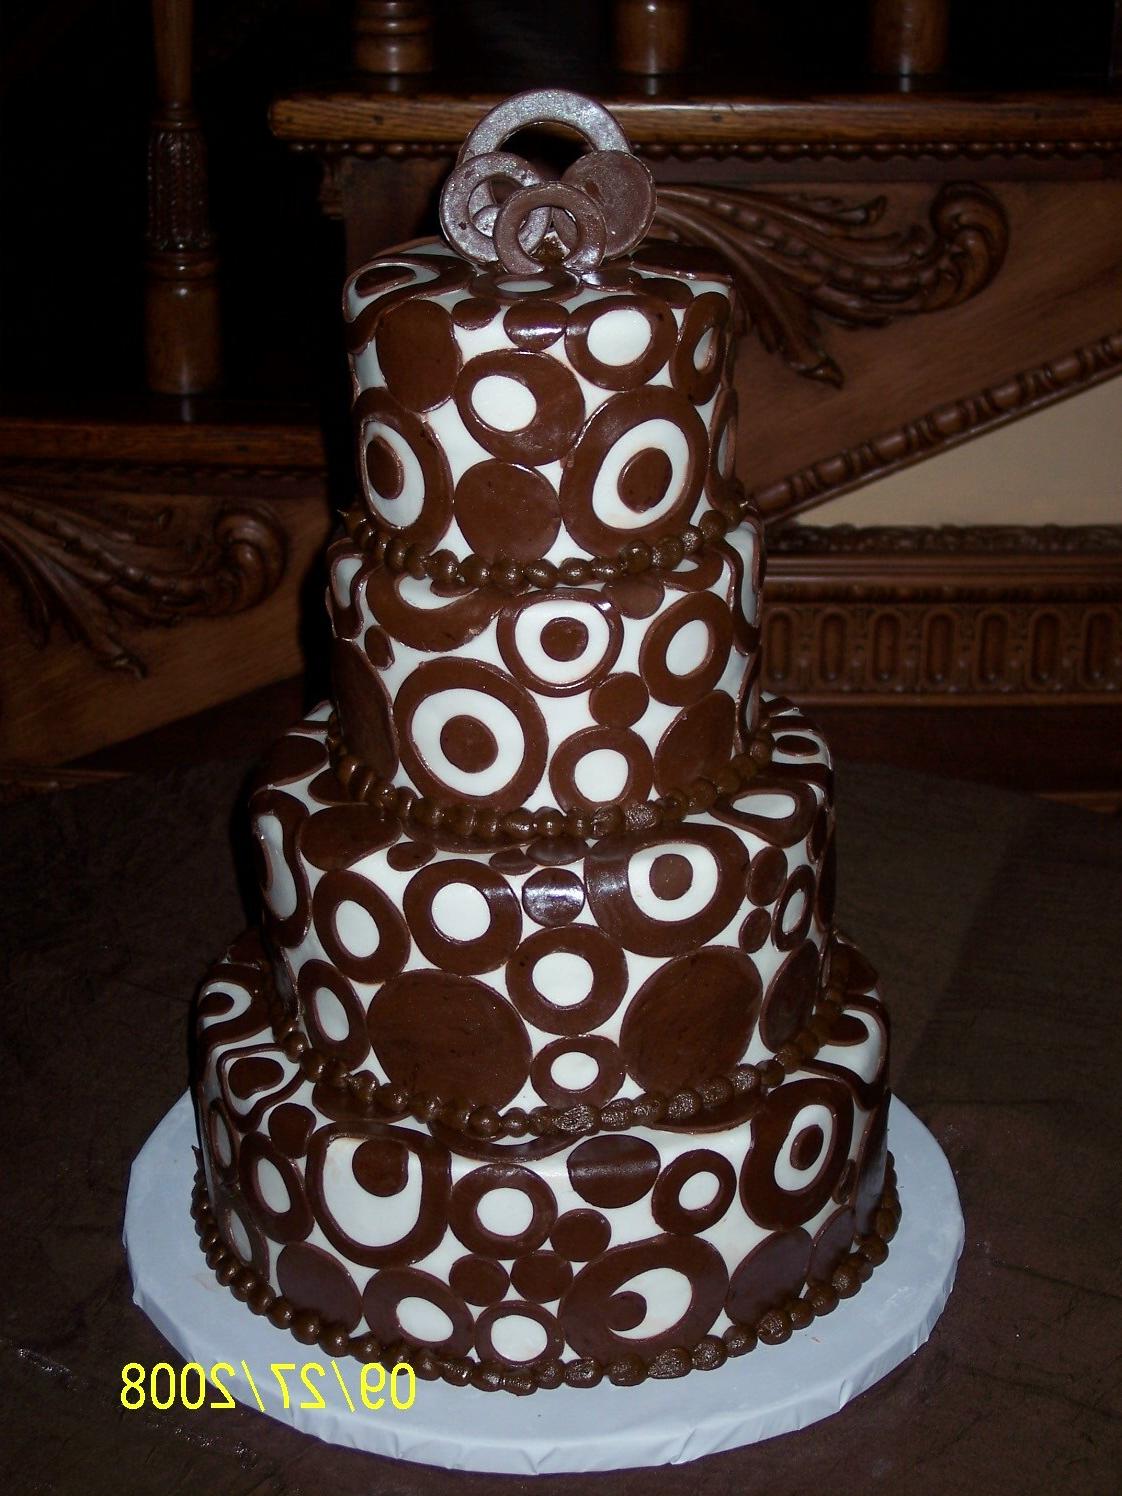 The cake was 4 tiers with